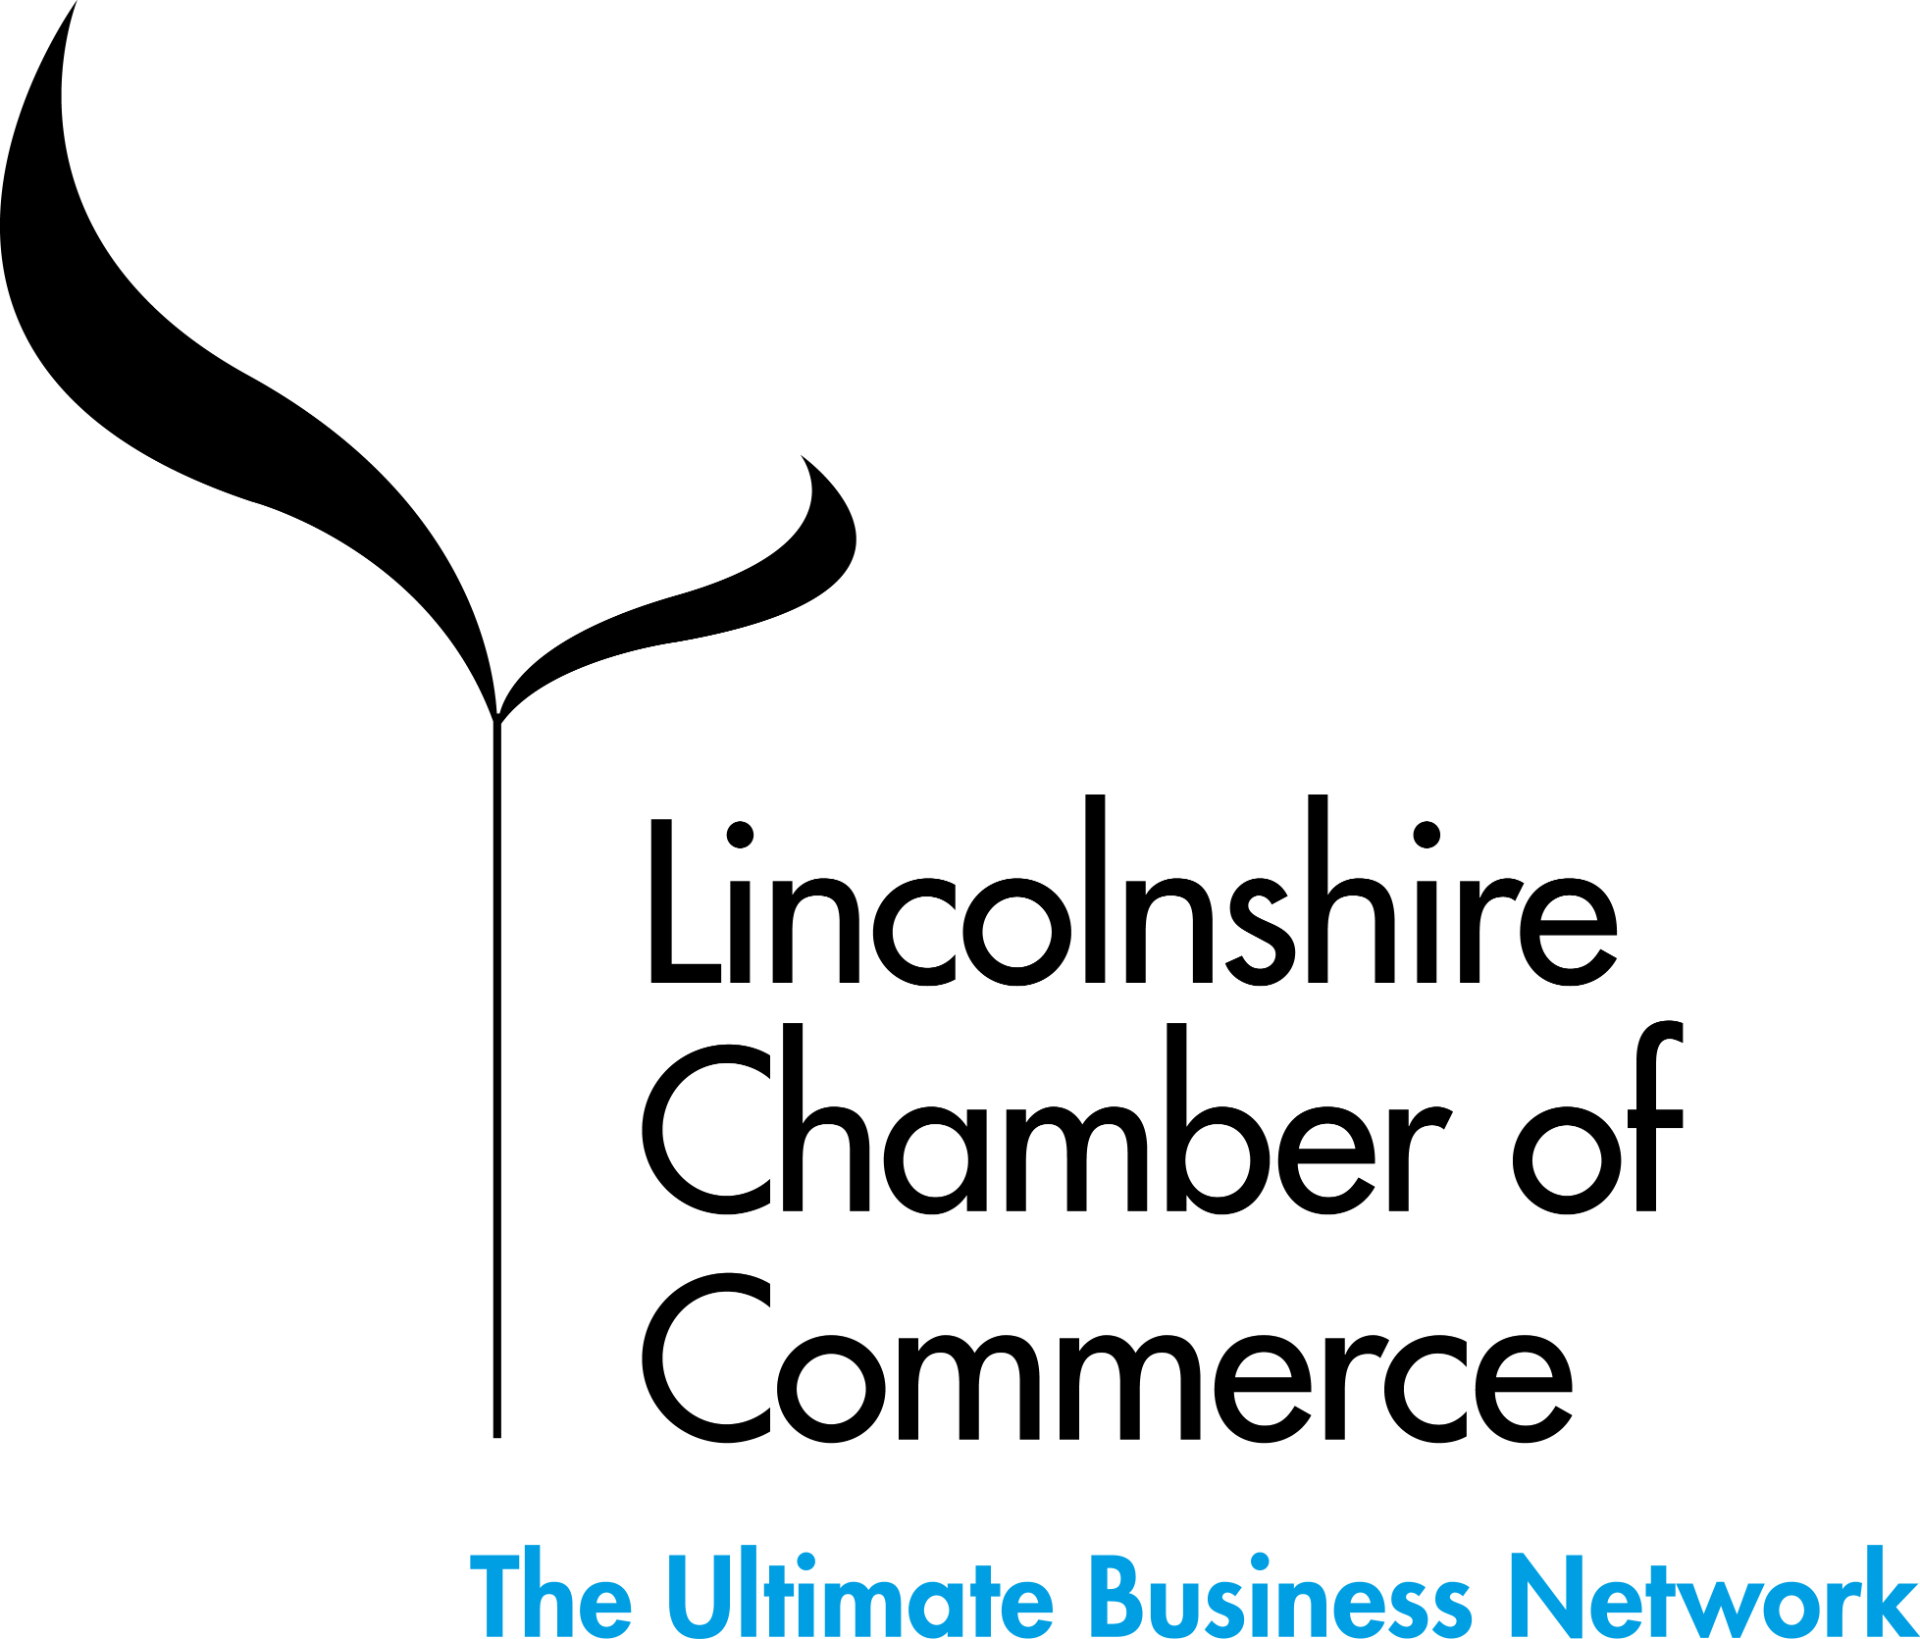 Lincolnshire Chamber of Commerce